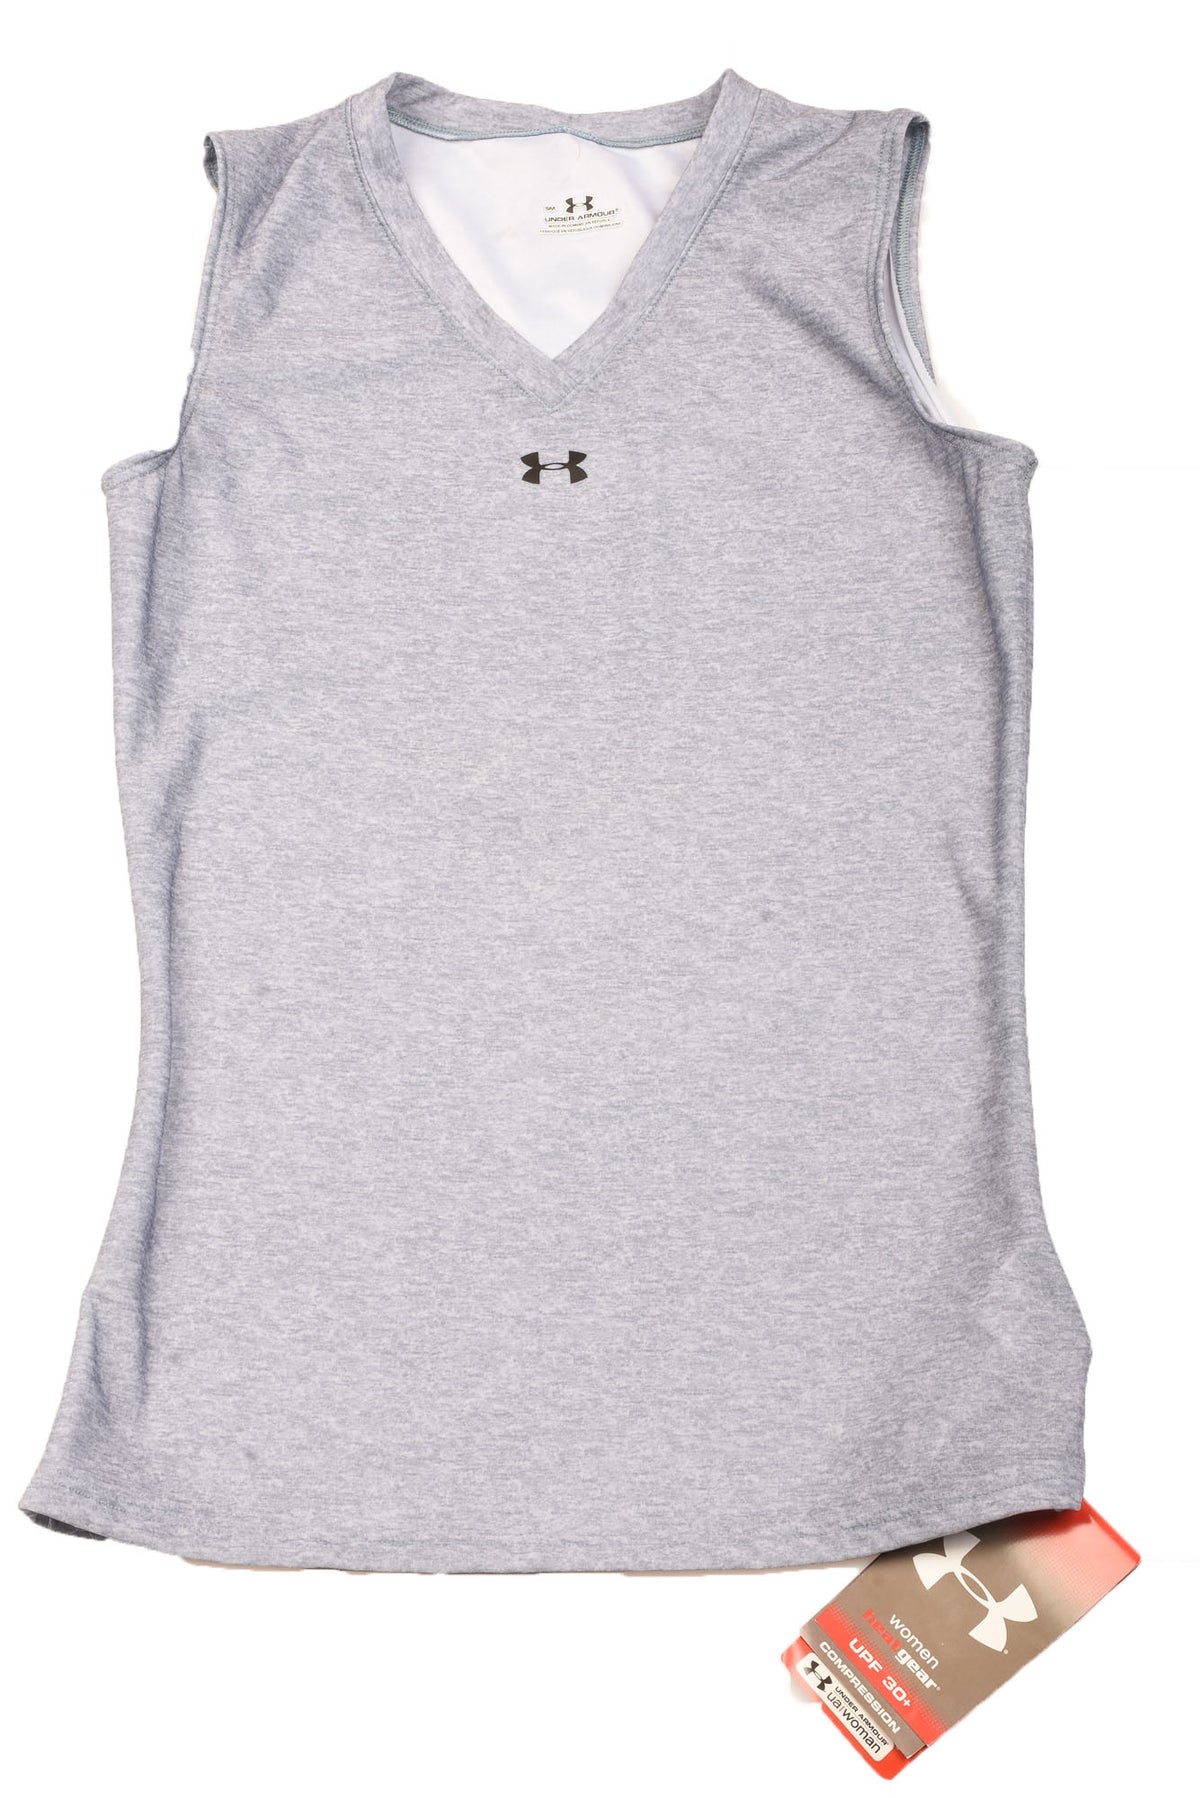 Under Armour Size Small Women's Activewear Top - Your Designer Thrift